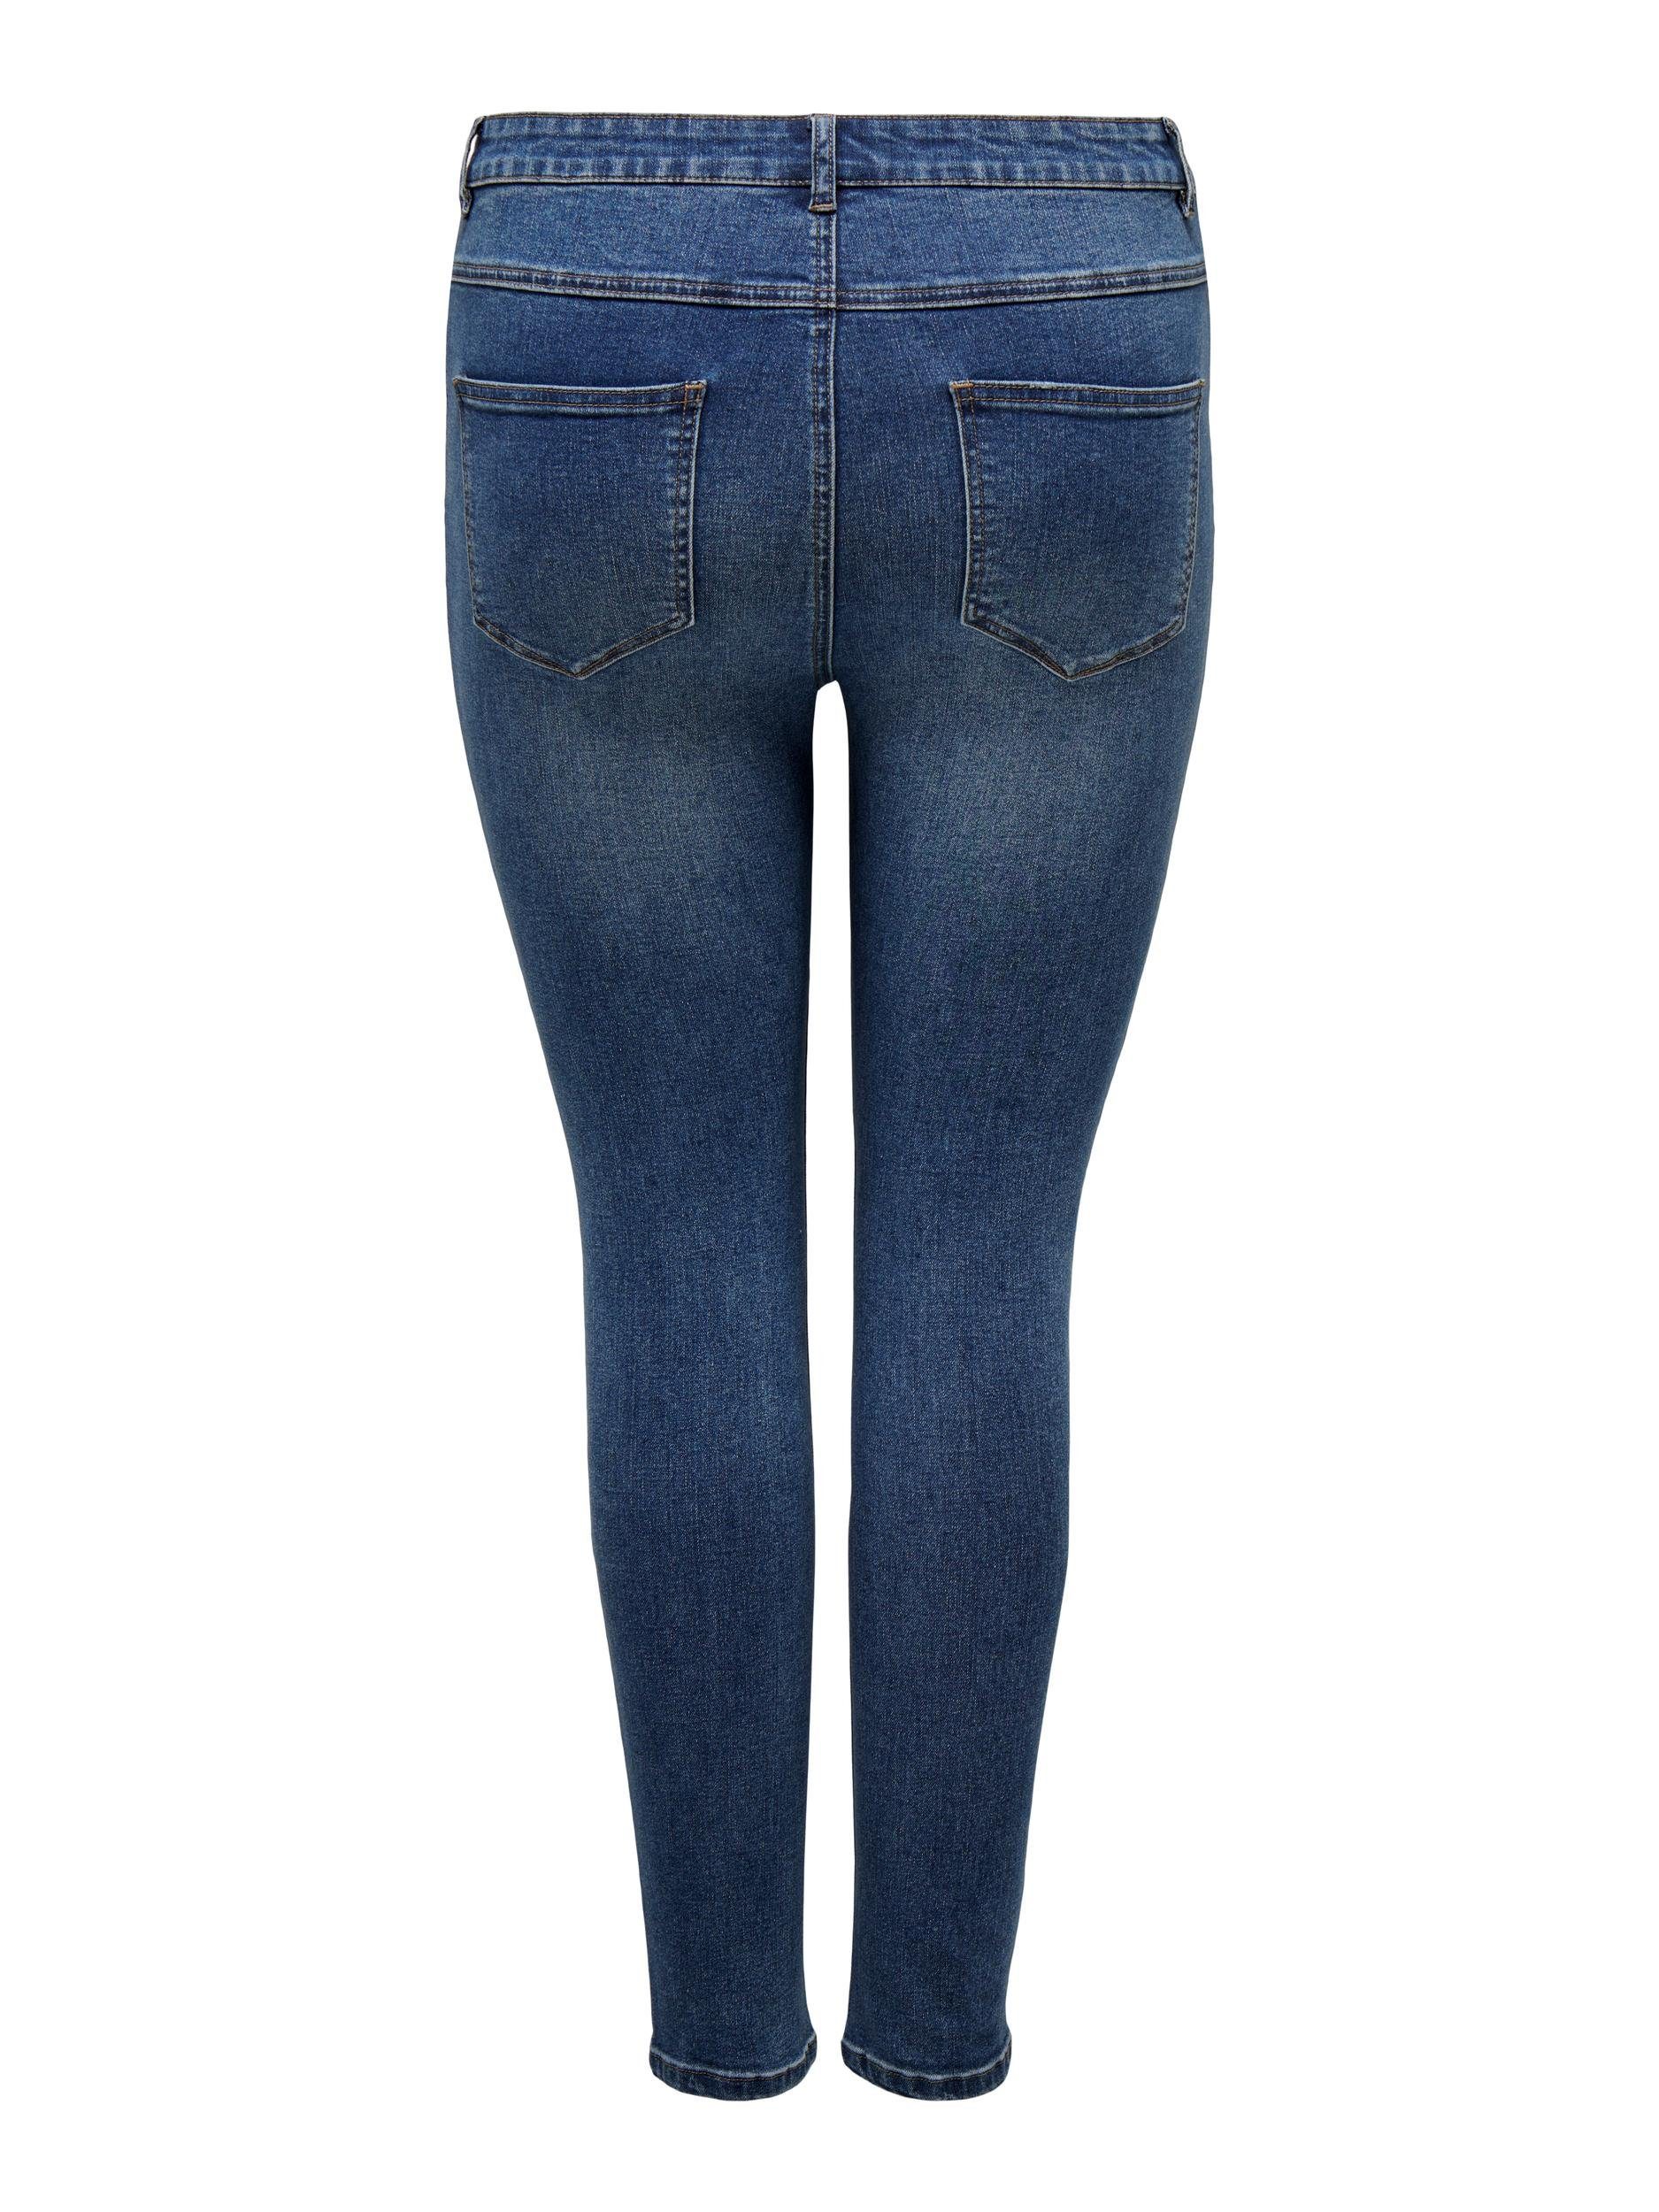 BF de | jeans ONLY fit OTTO GUA939 CARMAKOMA shop DNM Skinny CARROSE online SKINNY in HW